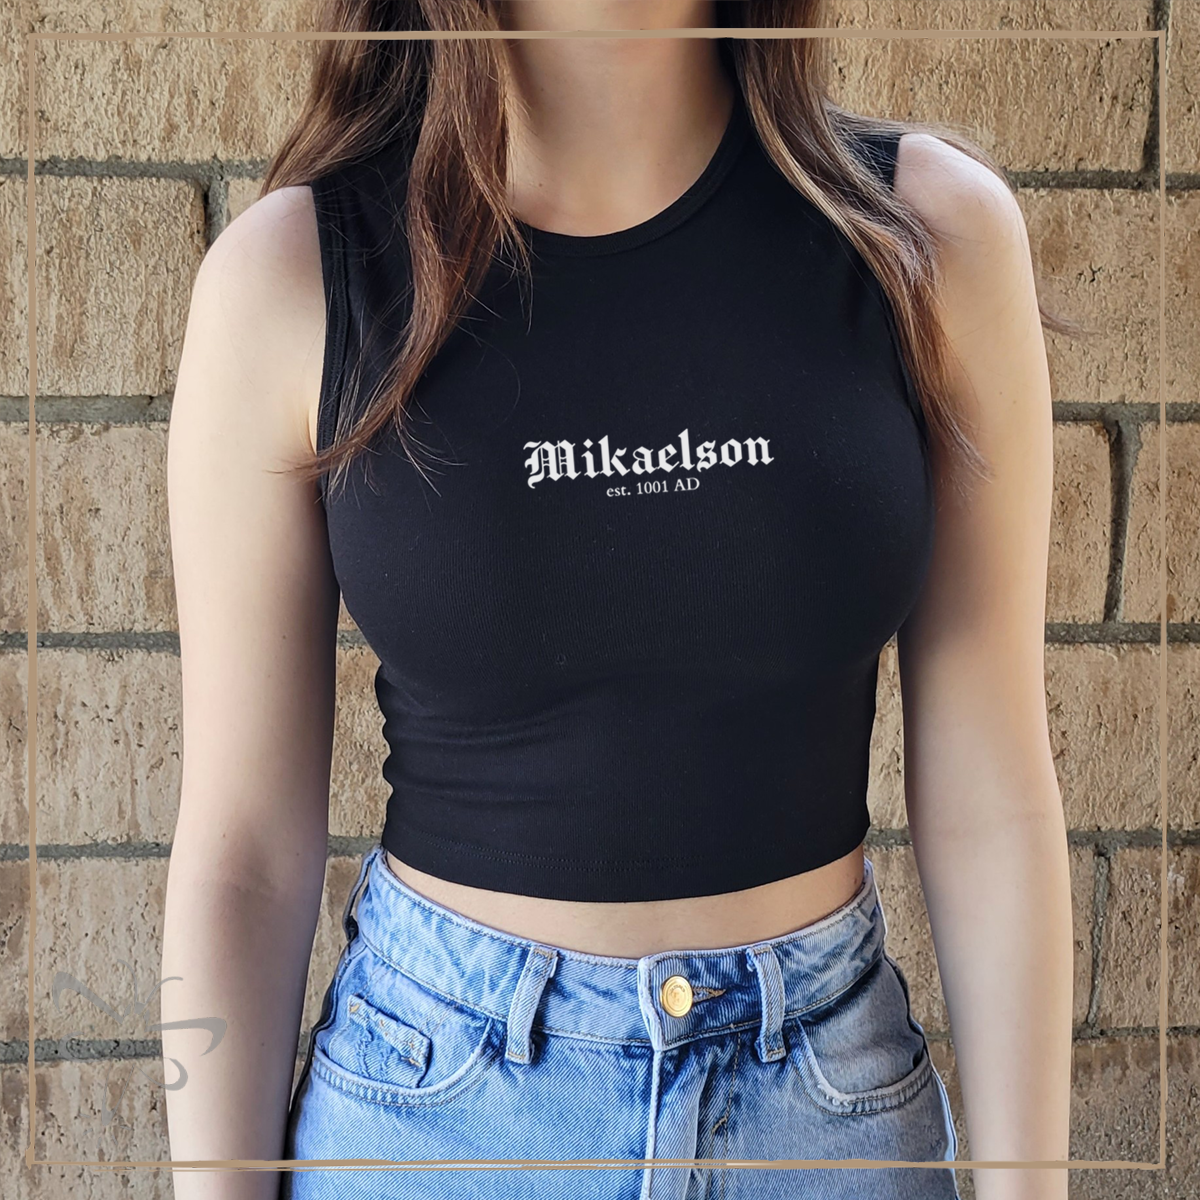 Mikaelson - Tank Top/Baby Tee S / Black Top